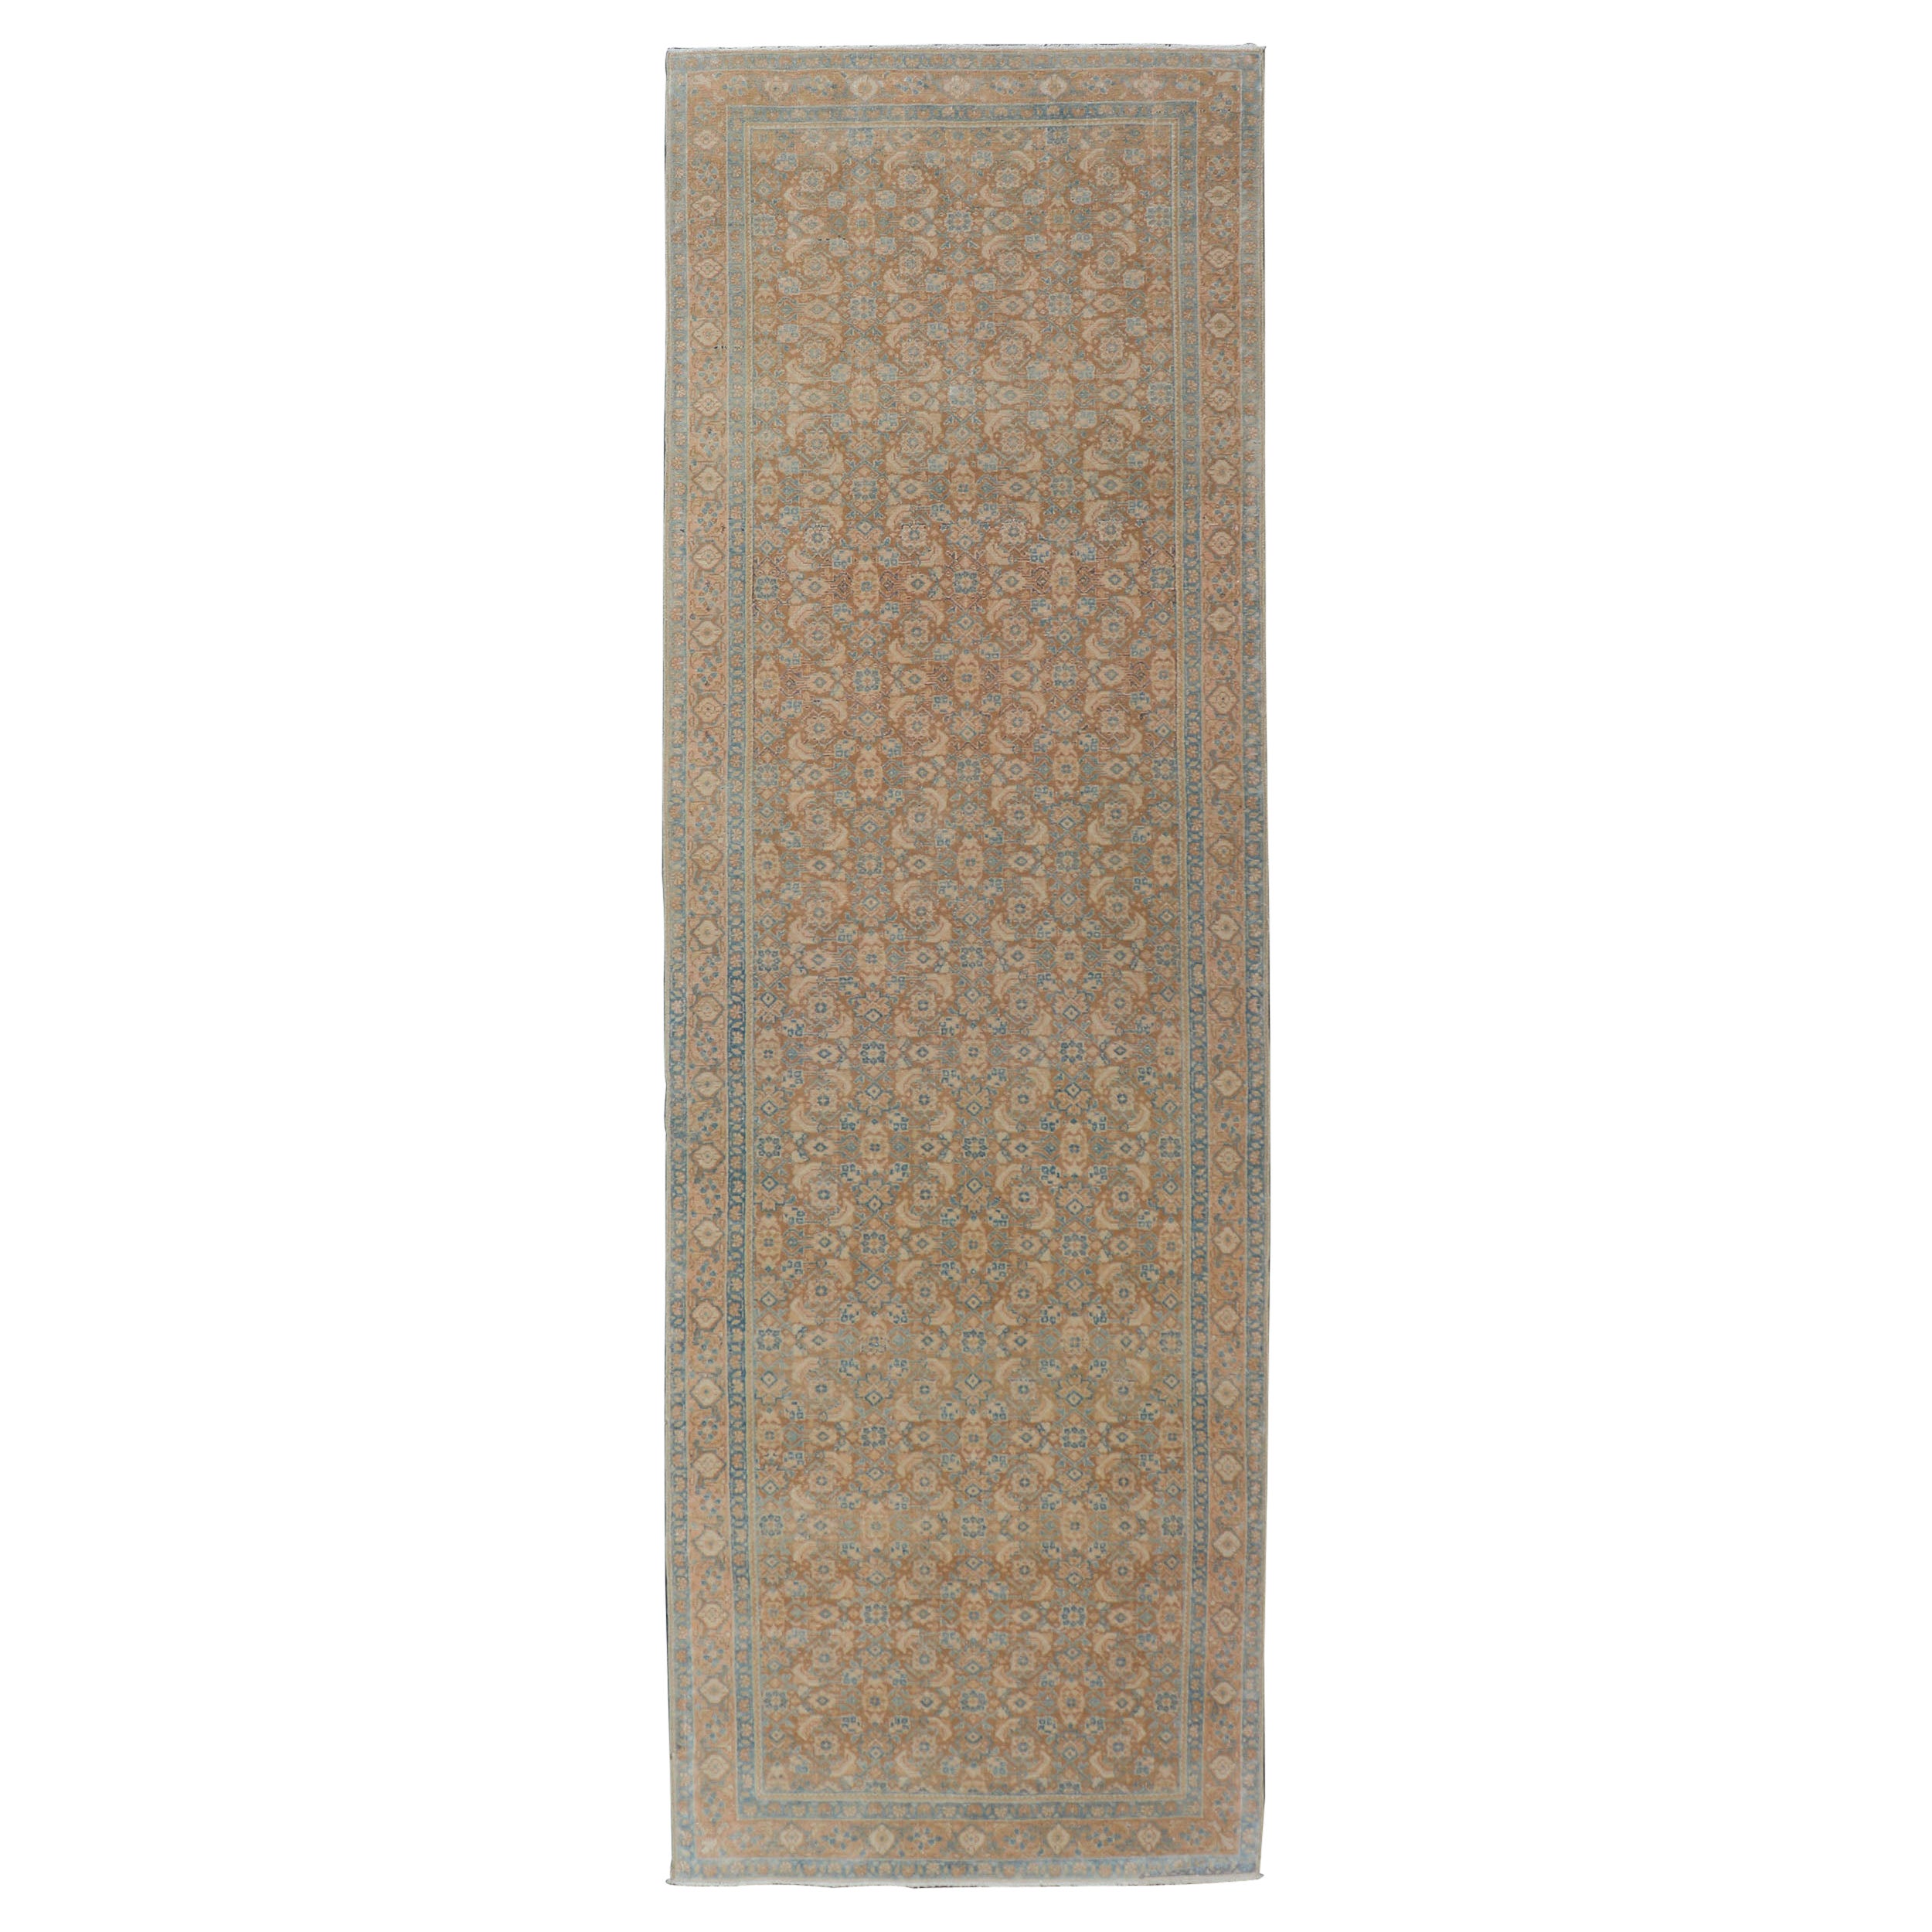 Vintage Persian Tabriz Runner with All-Over Floral Design in Tan and Blue